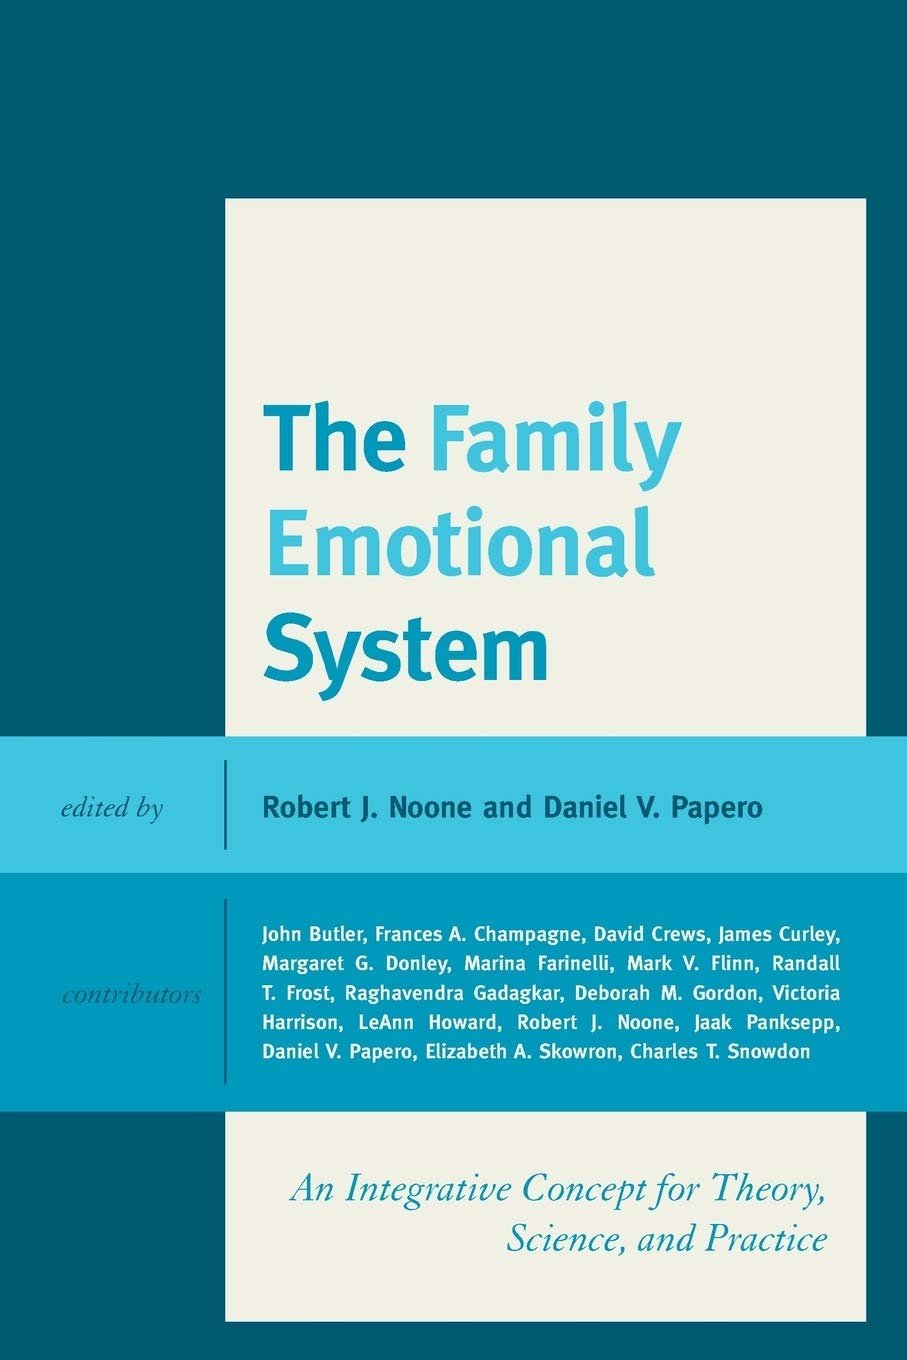 Noone and Papero, editors and contributors